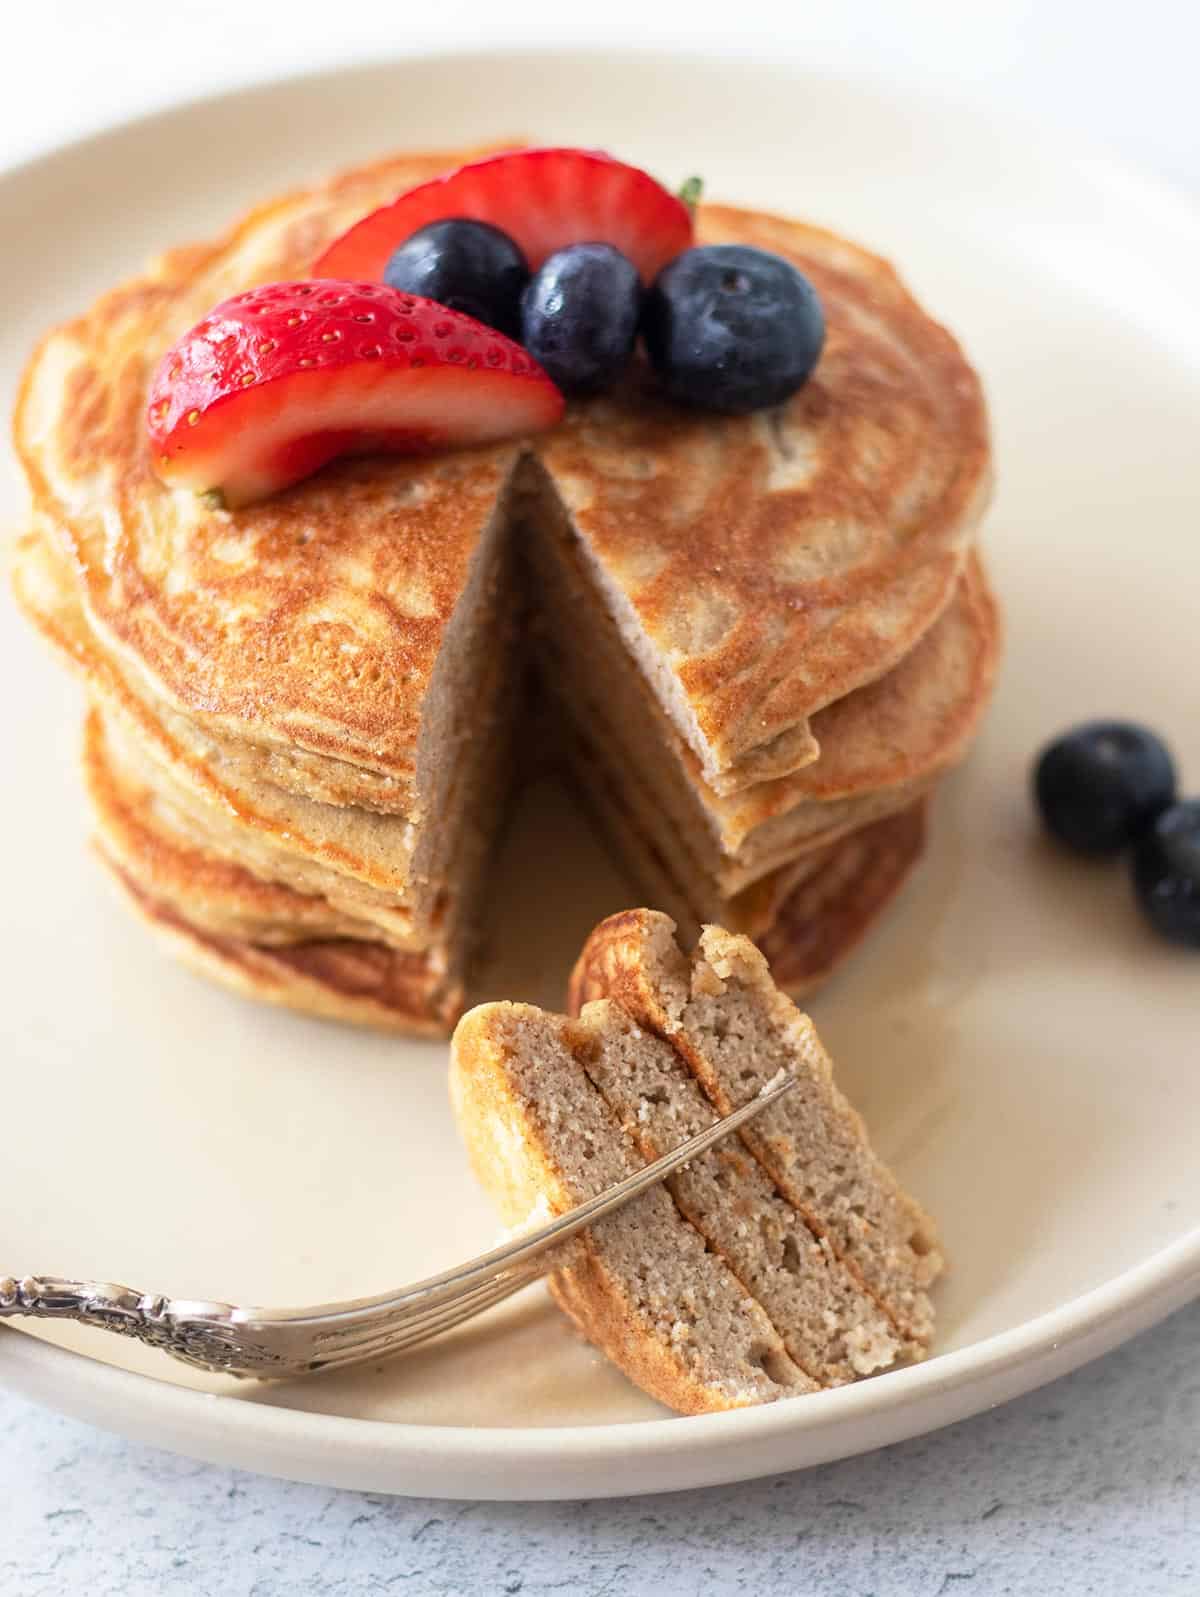 Coconut flour pancakes topped with fresh fruit and cut into a triangle shape pieces on a fork.